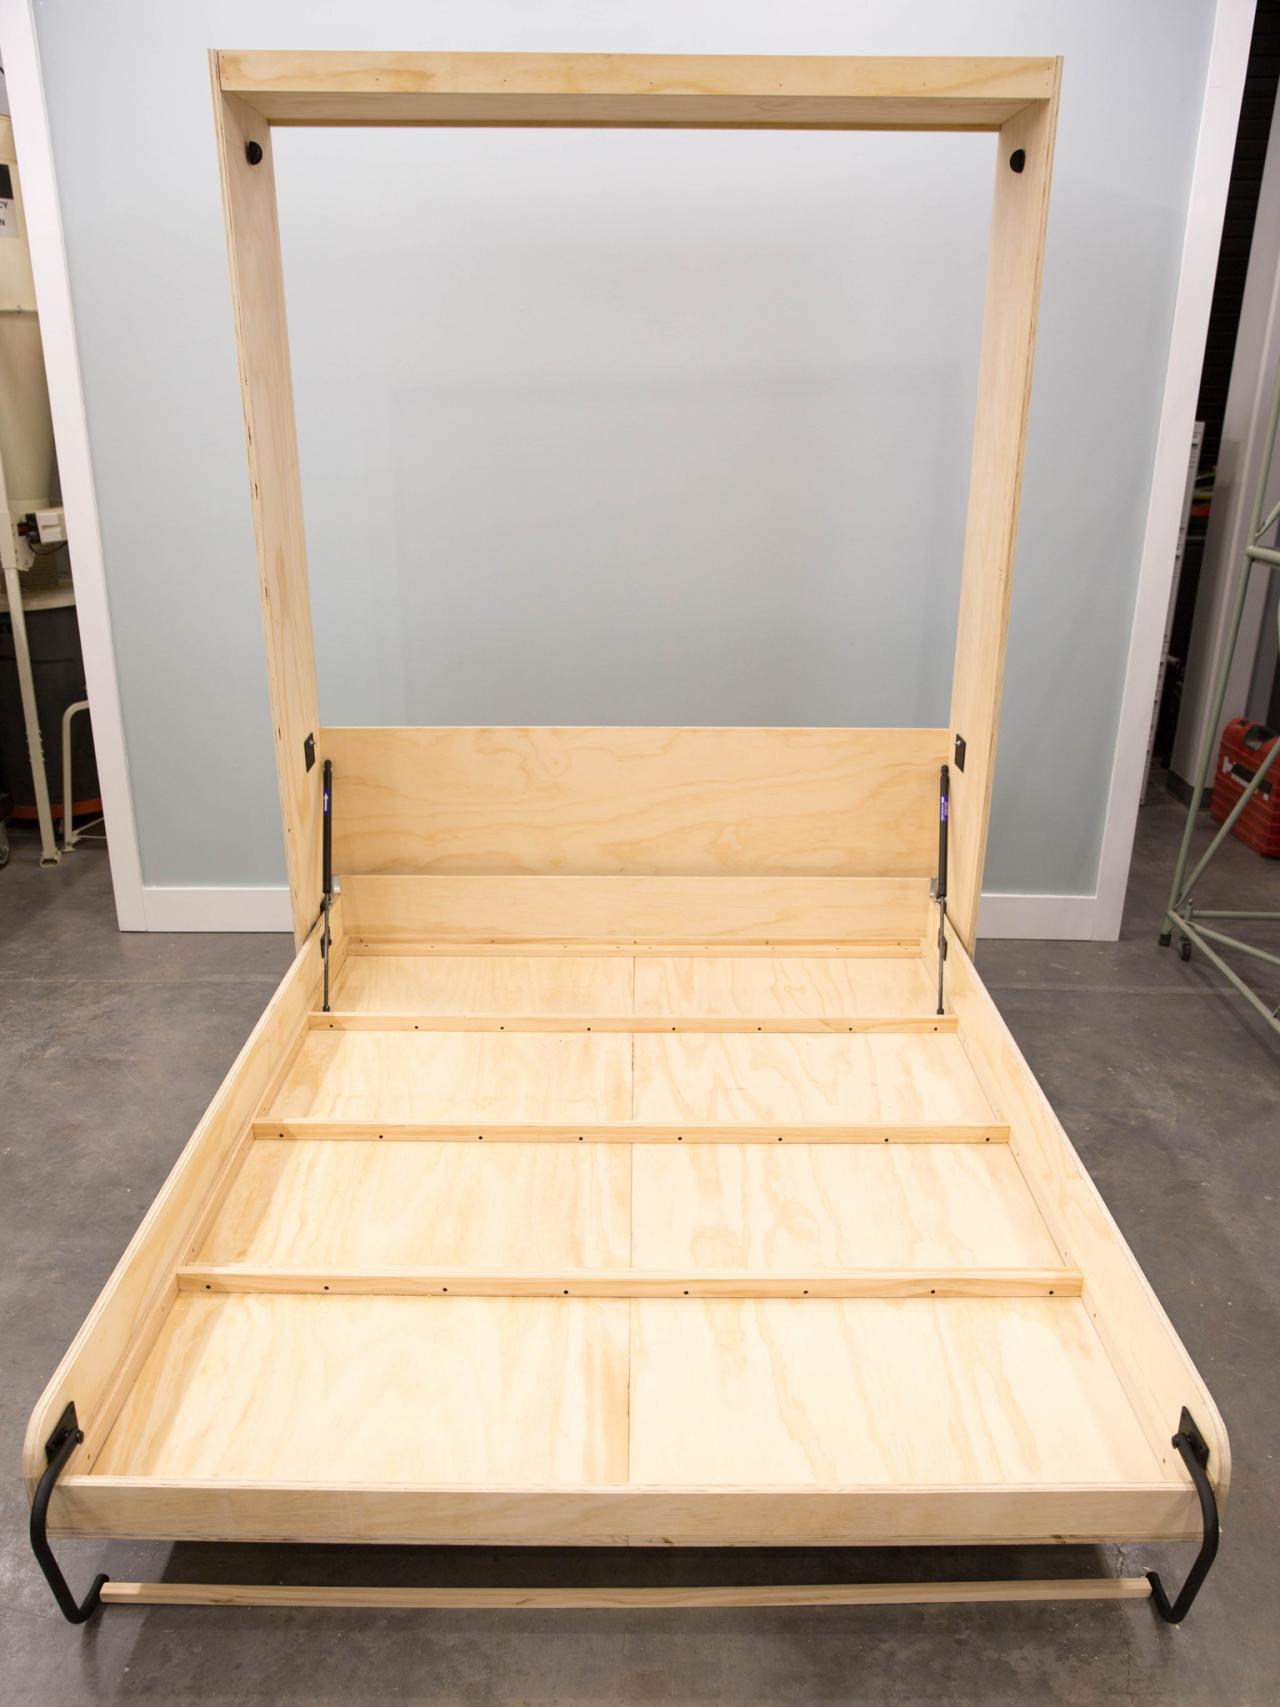 How To Build A Murphy Bed, How Do You Build A Horizontal Murphy Bed